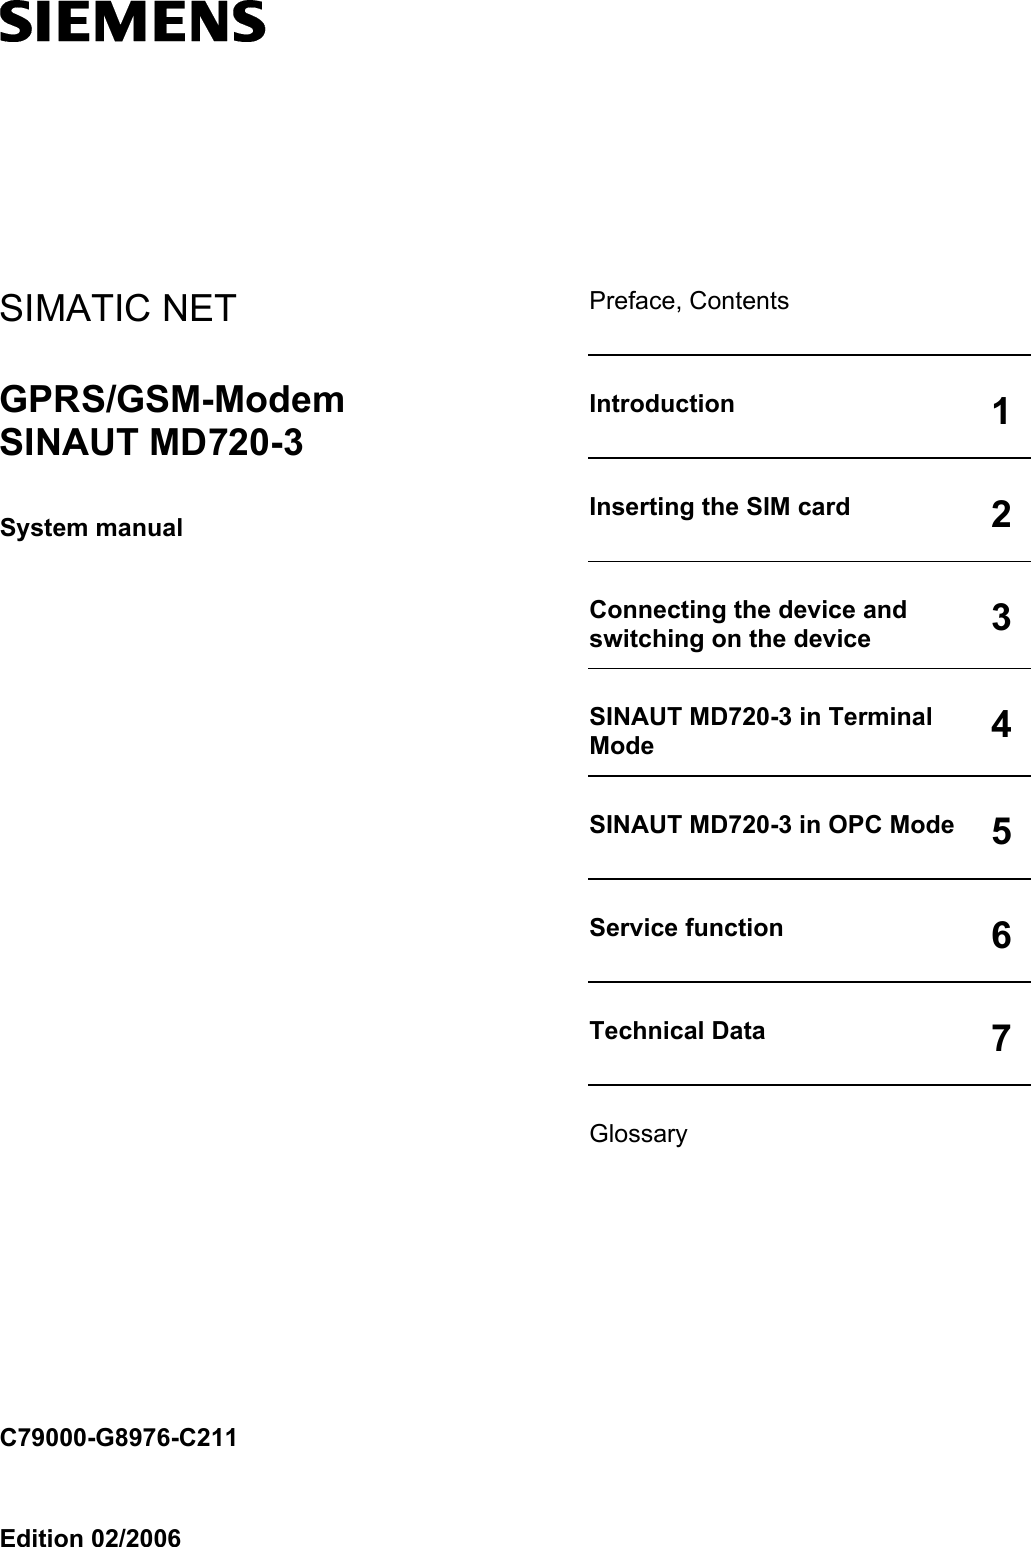    Preface, Contents   Introduction  1Inserting the SIM card  2Connecting the device and switching on the device  3SINAUT MD720-3 in Terminal Mode  4SINAUT MD720-3 in OPC Mode  5Service function  6Technical Data  7Glossary  SIMATIC NET GPRS/GSM-Modem SINAUT MD720-3 System manual                         C79000-G8976-C211  Edition 02/2006 